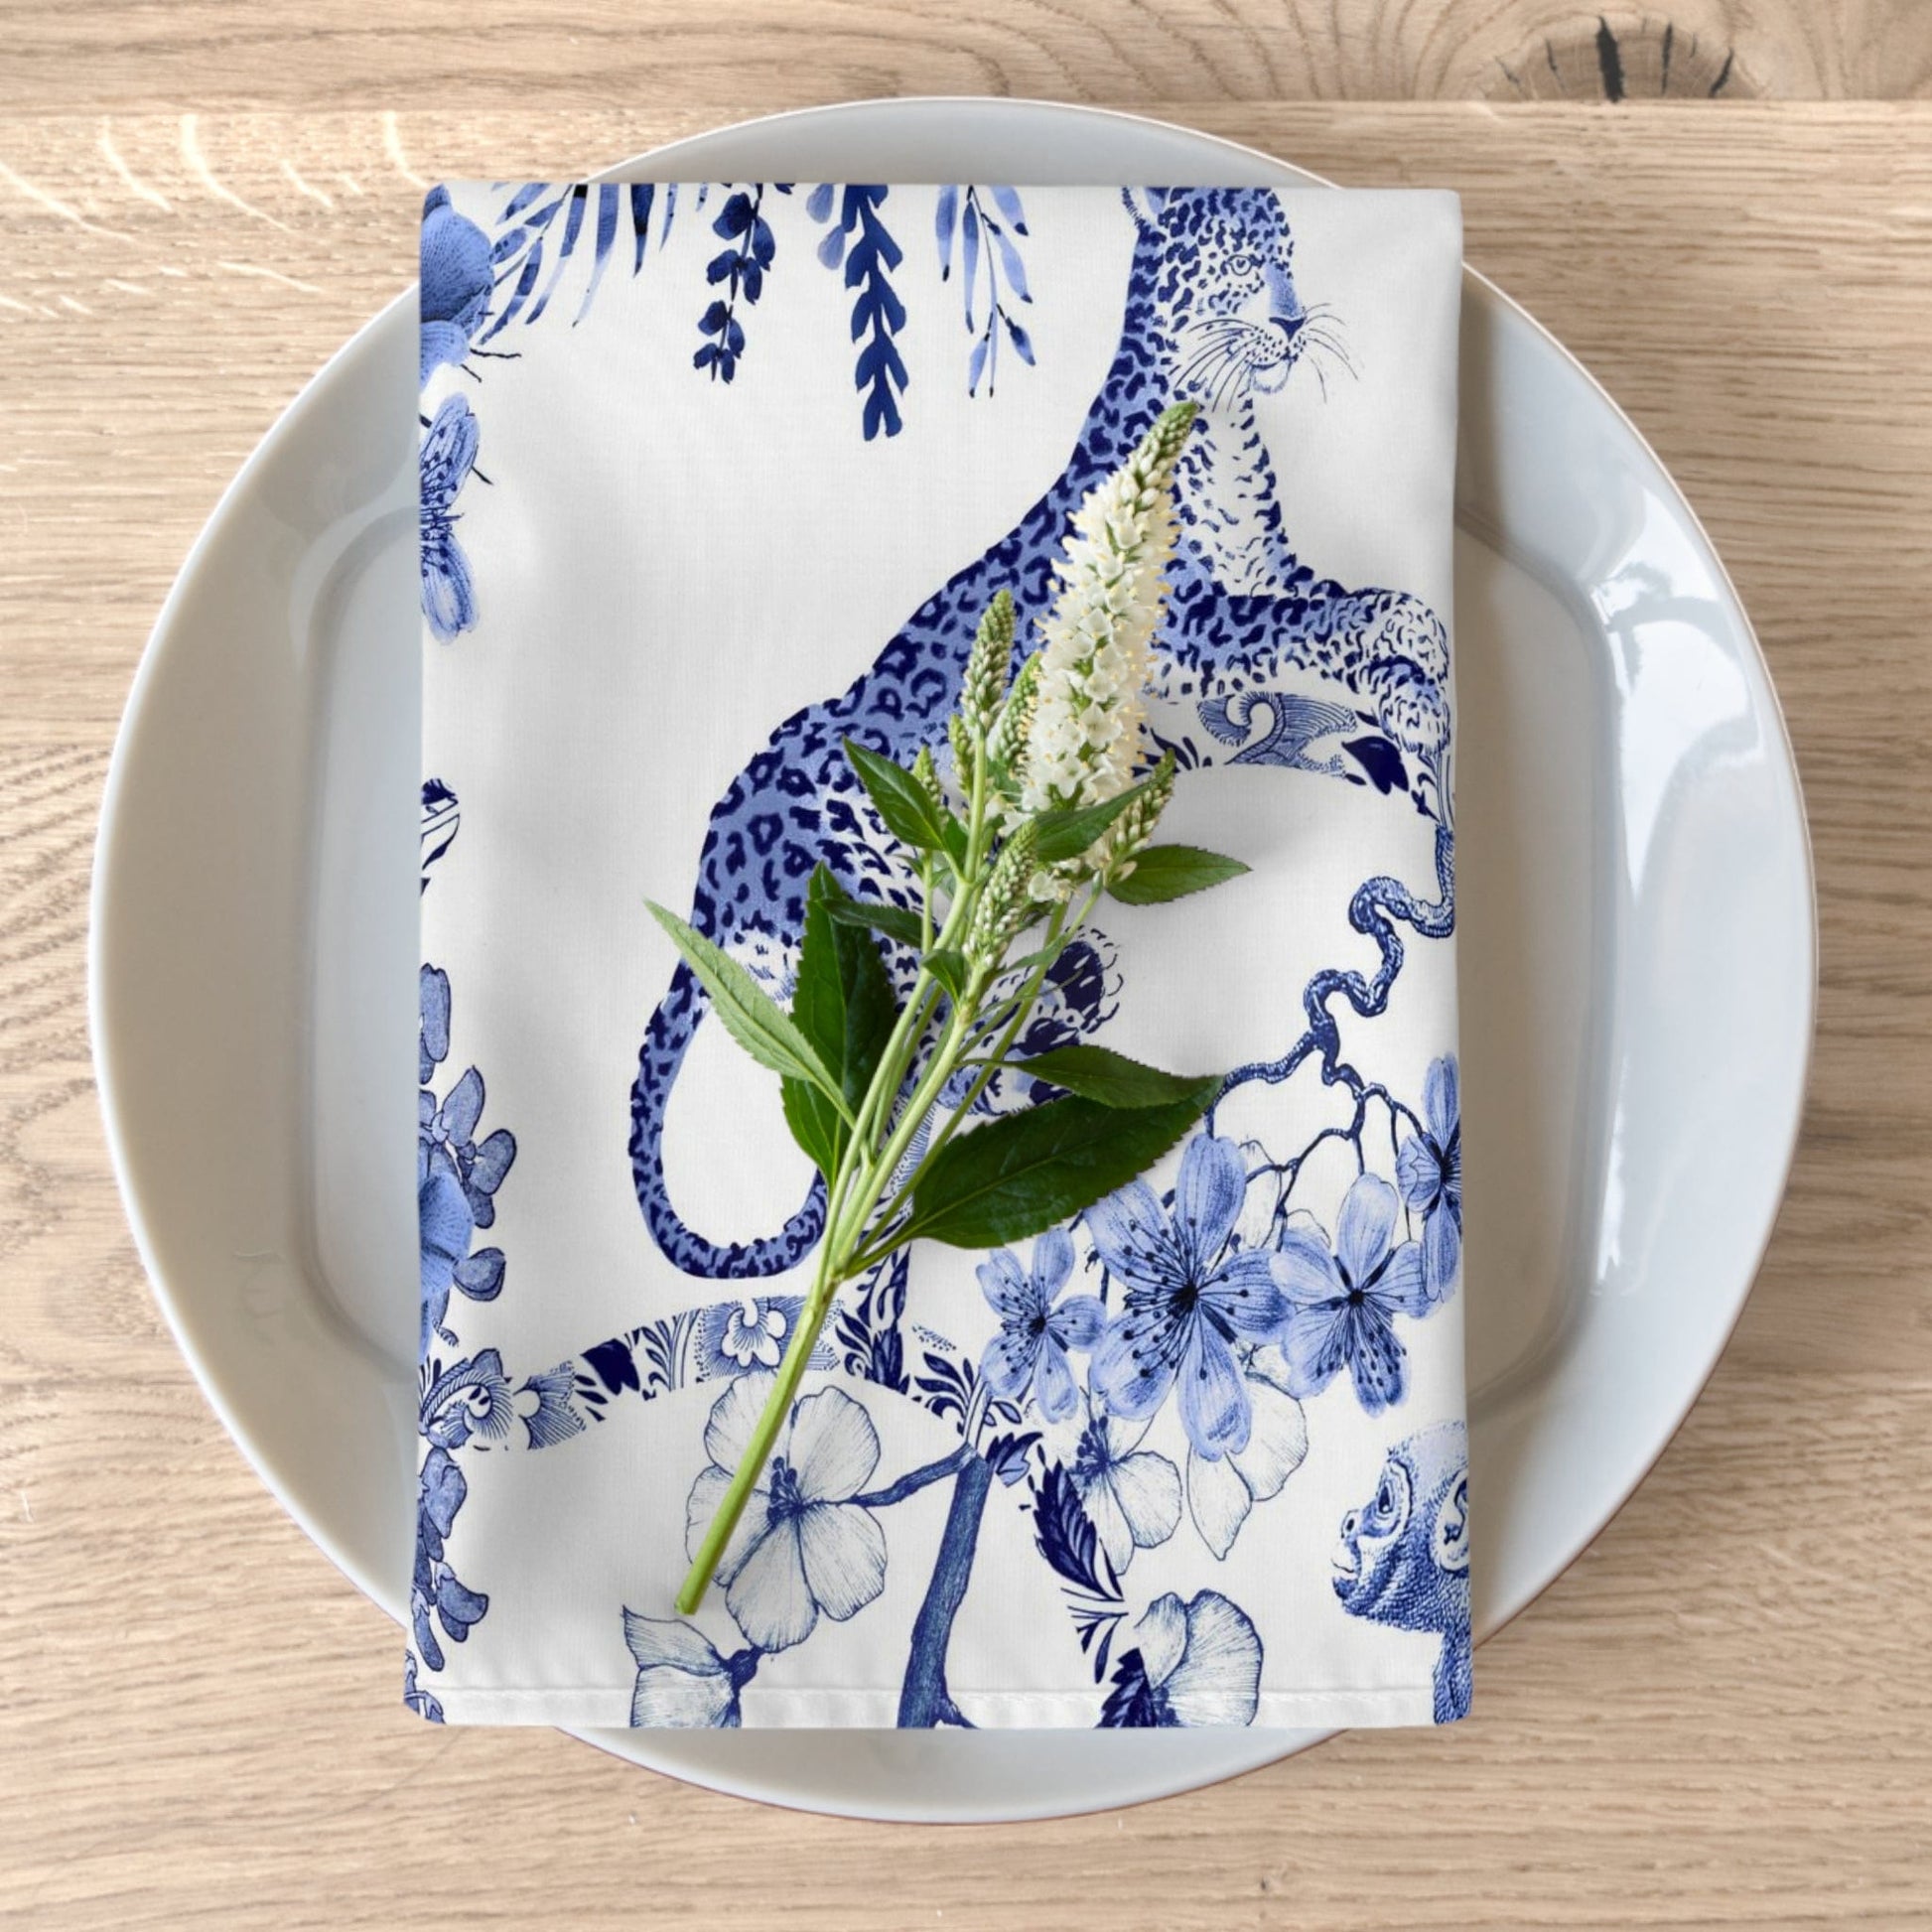 Printify Chinoiserie Botanical Toile Napkins Set of 4, Floral Blue and White Chinoiserie Jungle Table Linen, Country Farmhouse Decor Accessories 4-piece set / White / 19" × 19" 31591111042773290028